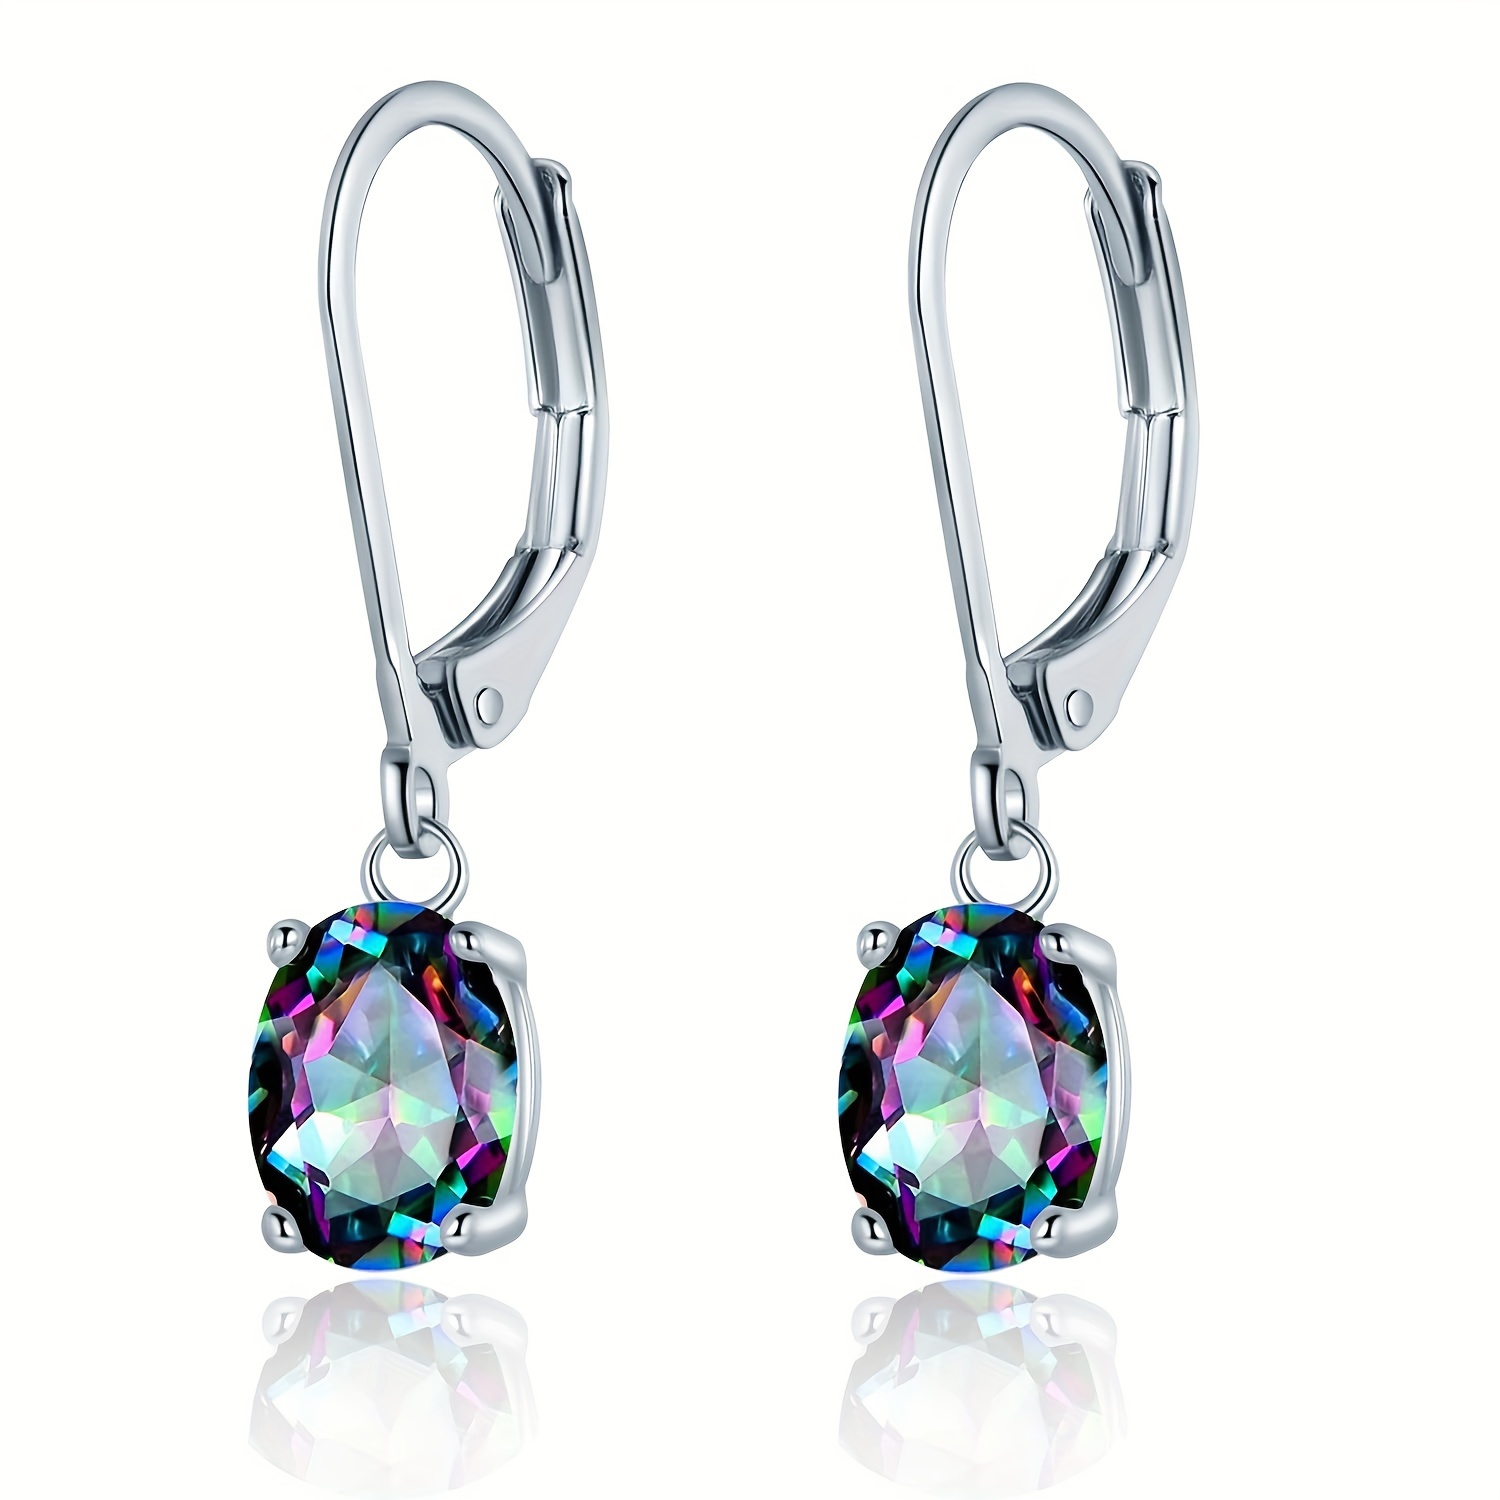 

Rainbow Cz 6 * 8mm Oval Leverback Earrings For Women 18k White Gold Plated Dangle Lightweight Hypoallergenic Jewelry Gifts